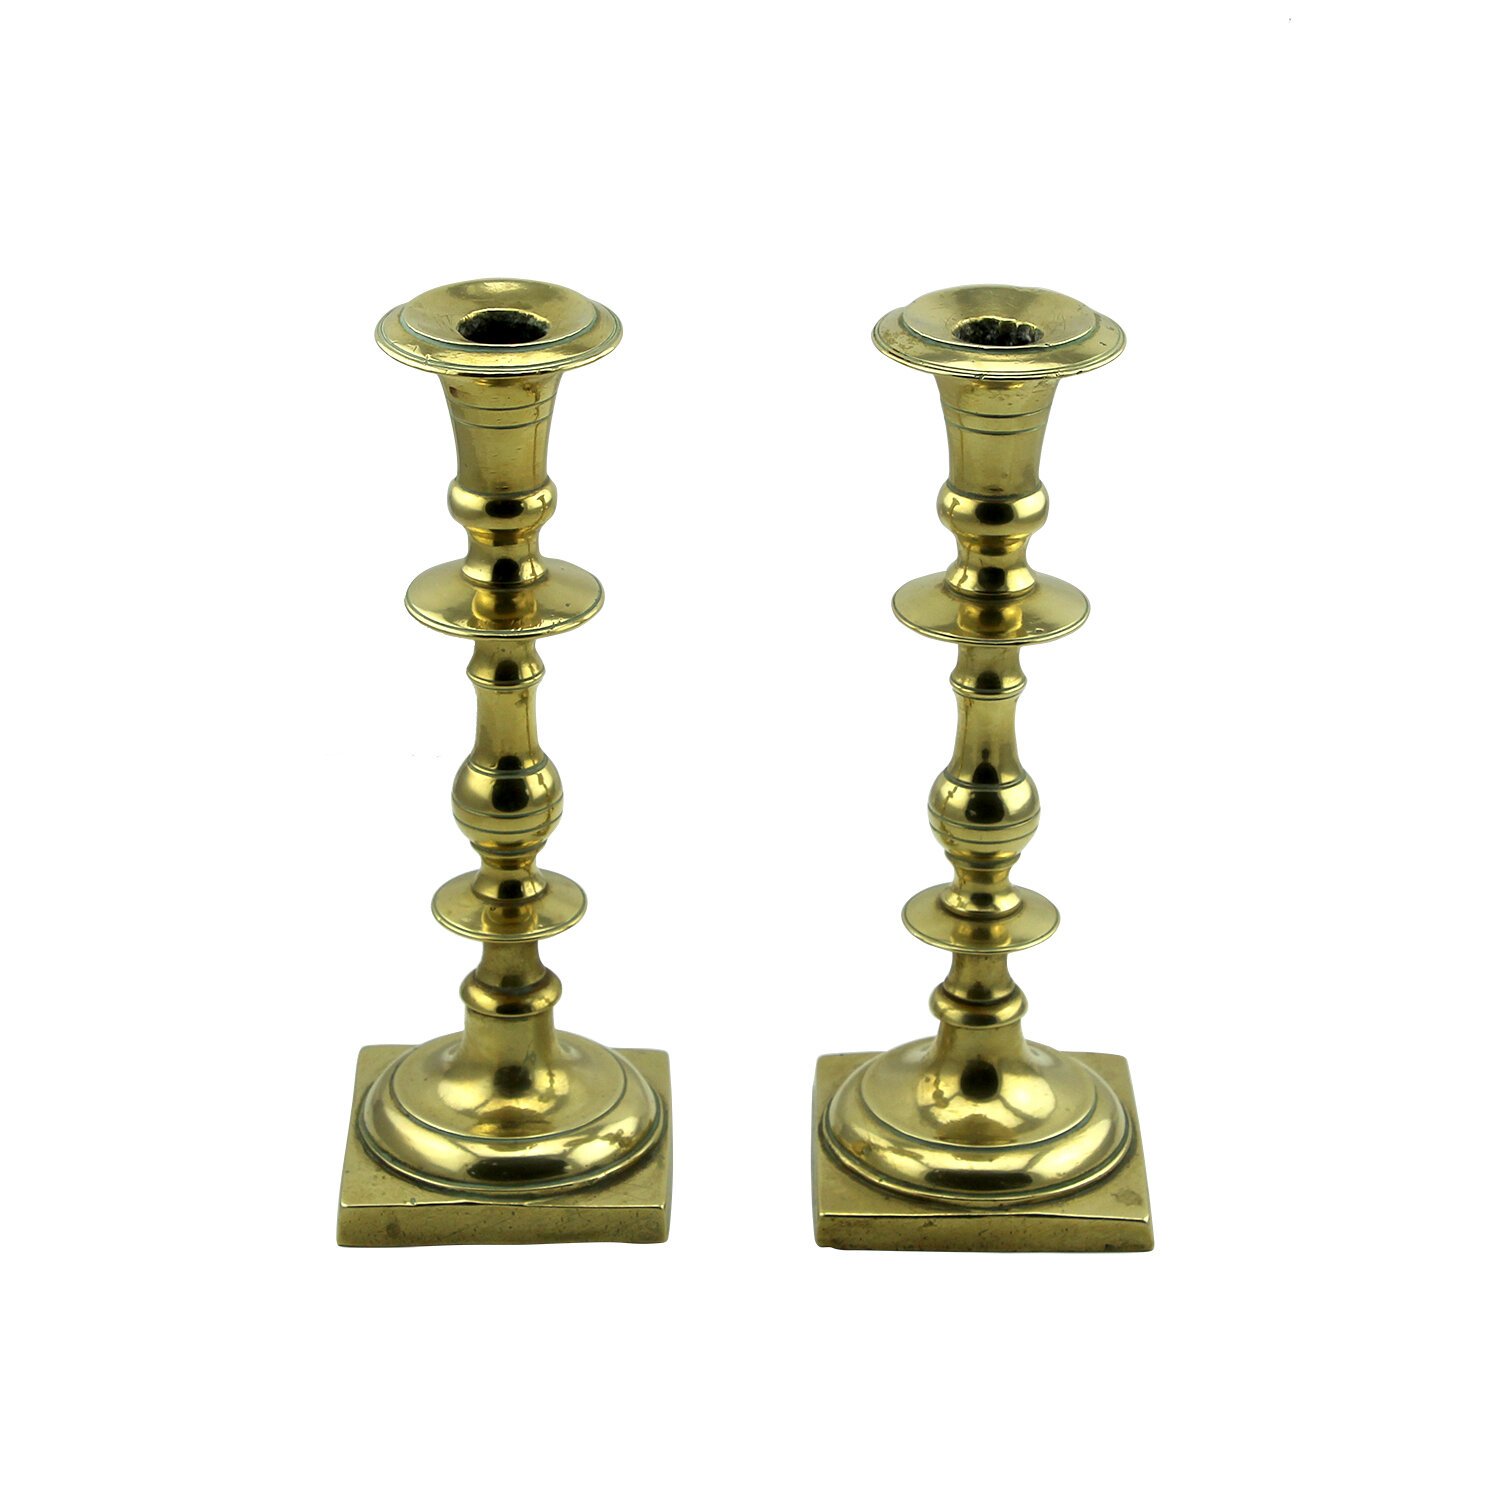 Chamber Candlestick Bedroom Candlestick Large Candlestick Brass Candleholder Candle Plate Brass Candlestick Solid Brass Vintage Brass